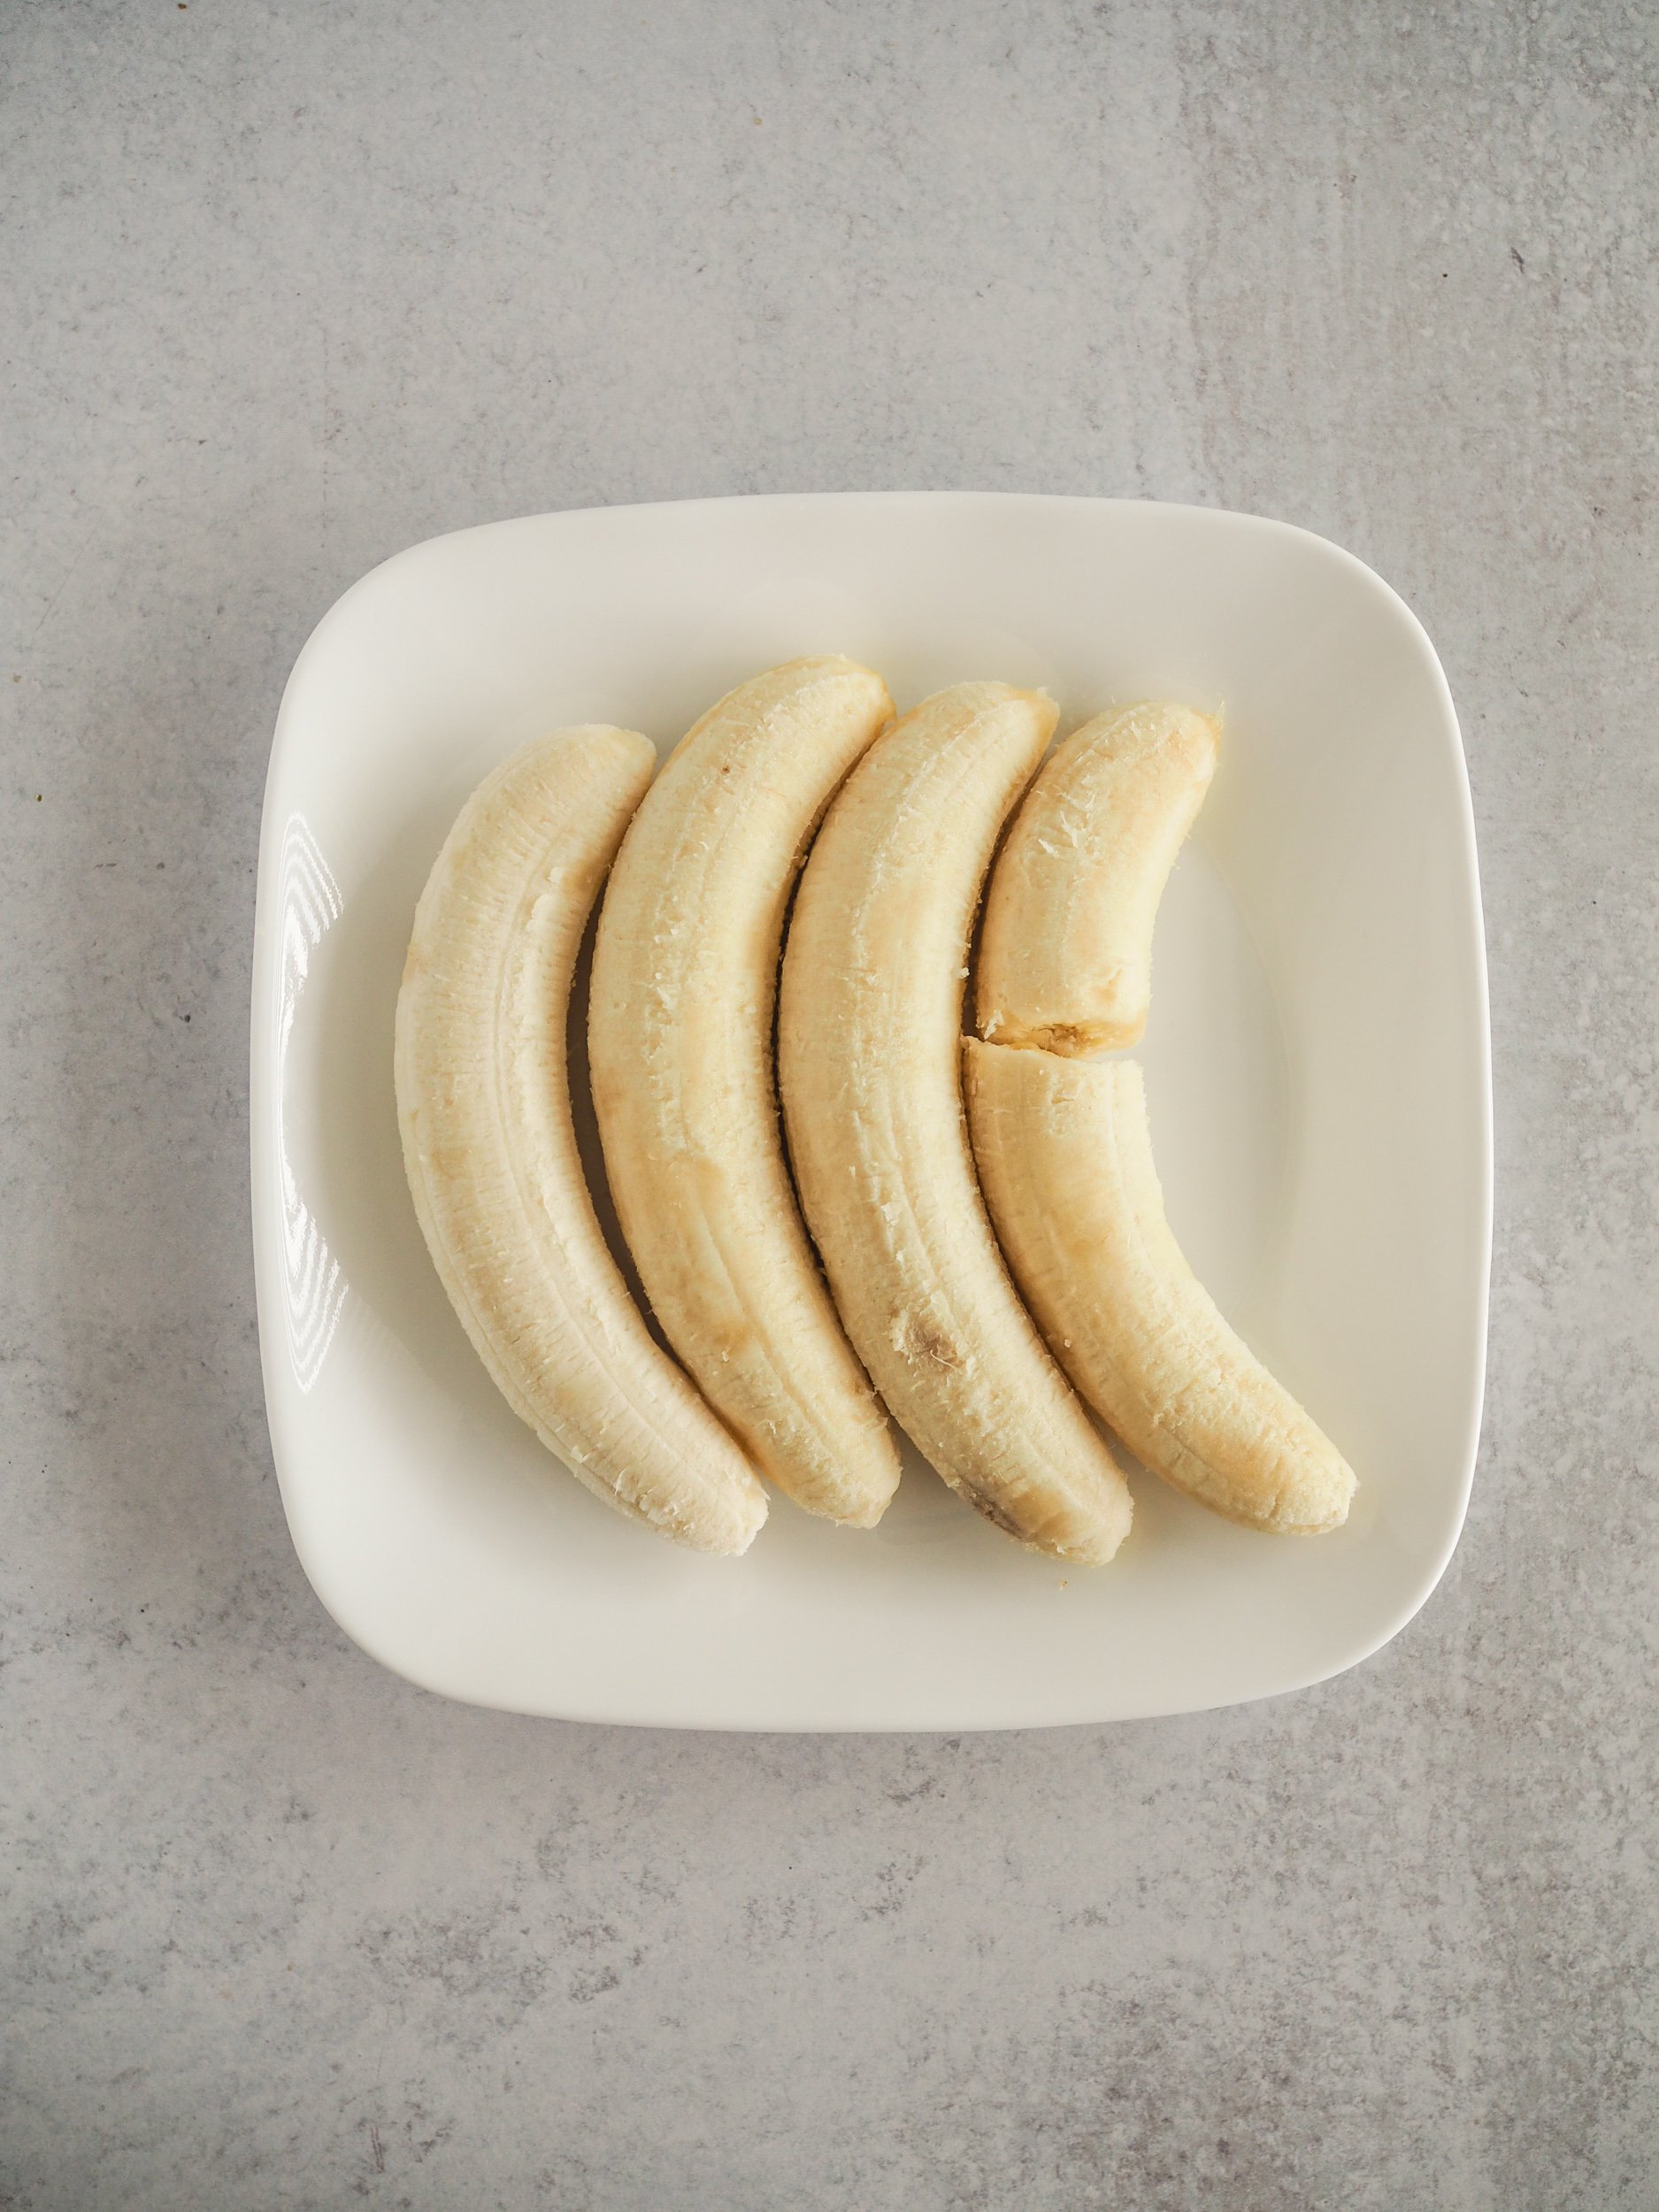 Four bananas on a white plate before getting mashed.